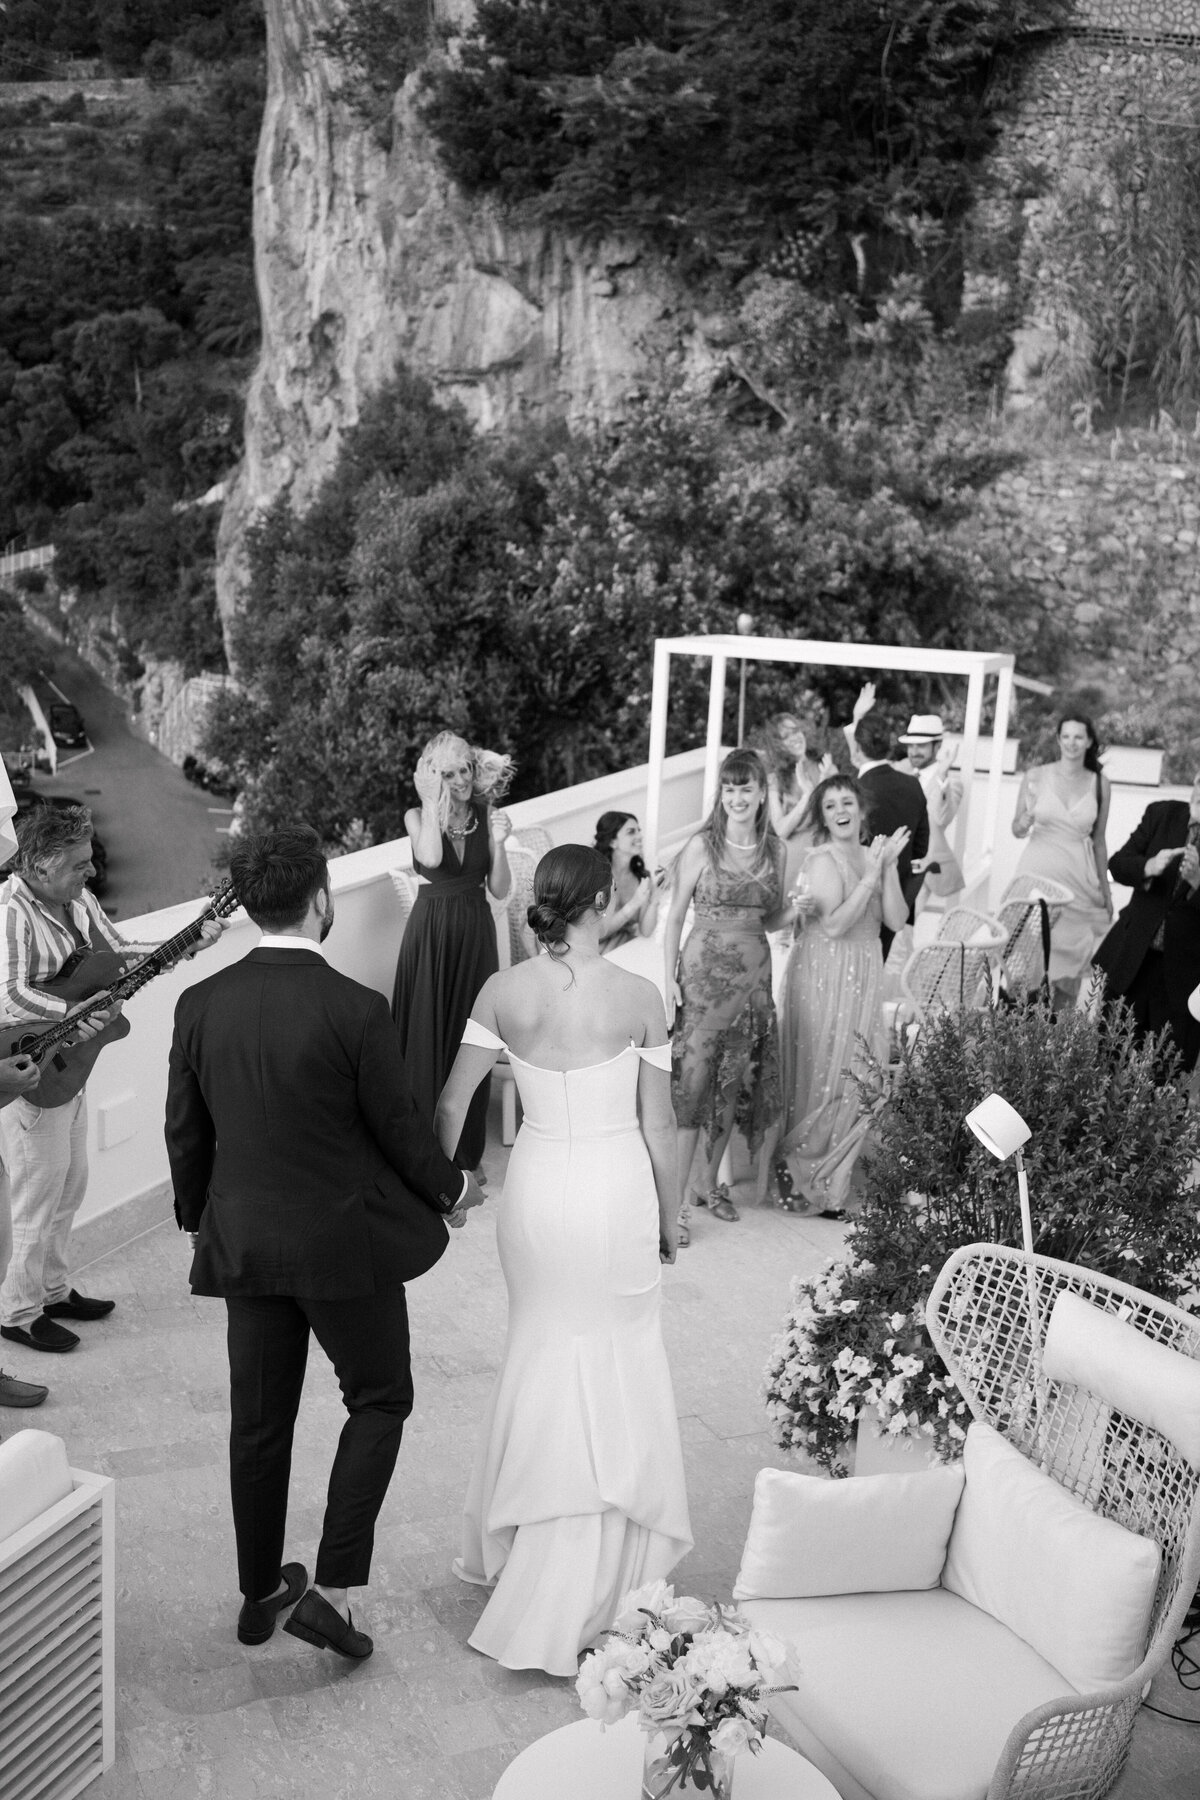 Bride and groom entering the party at Amalfi wedding roof top